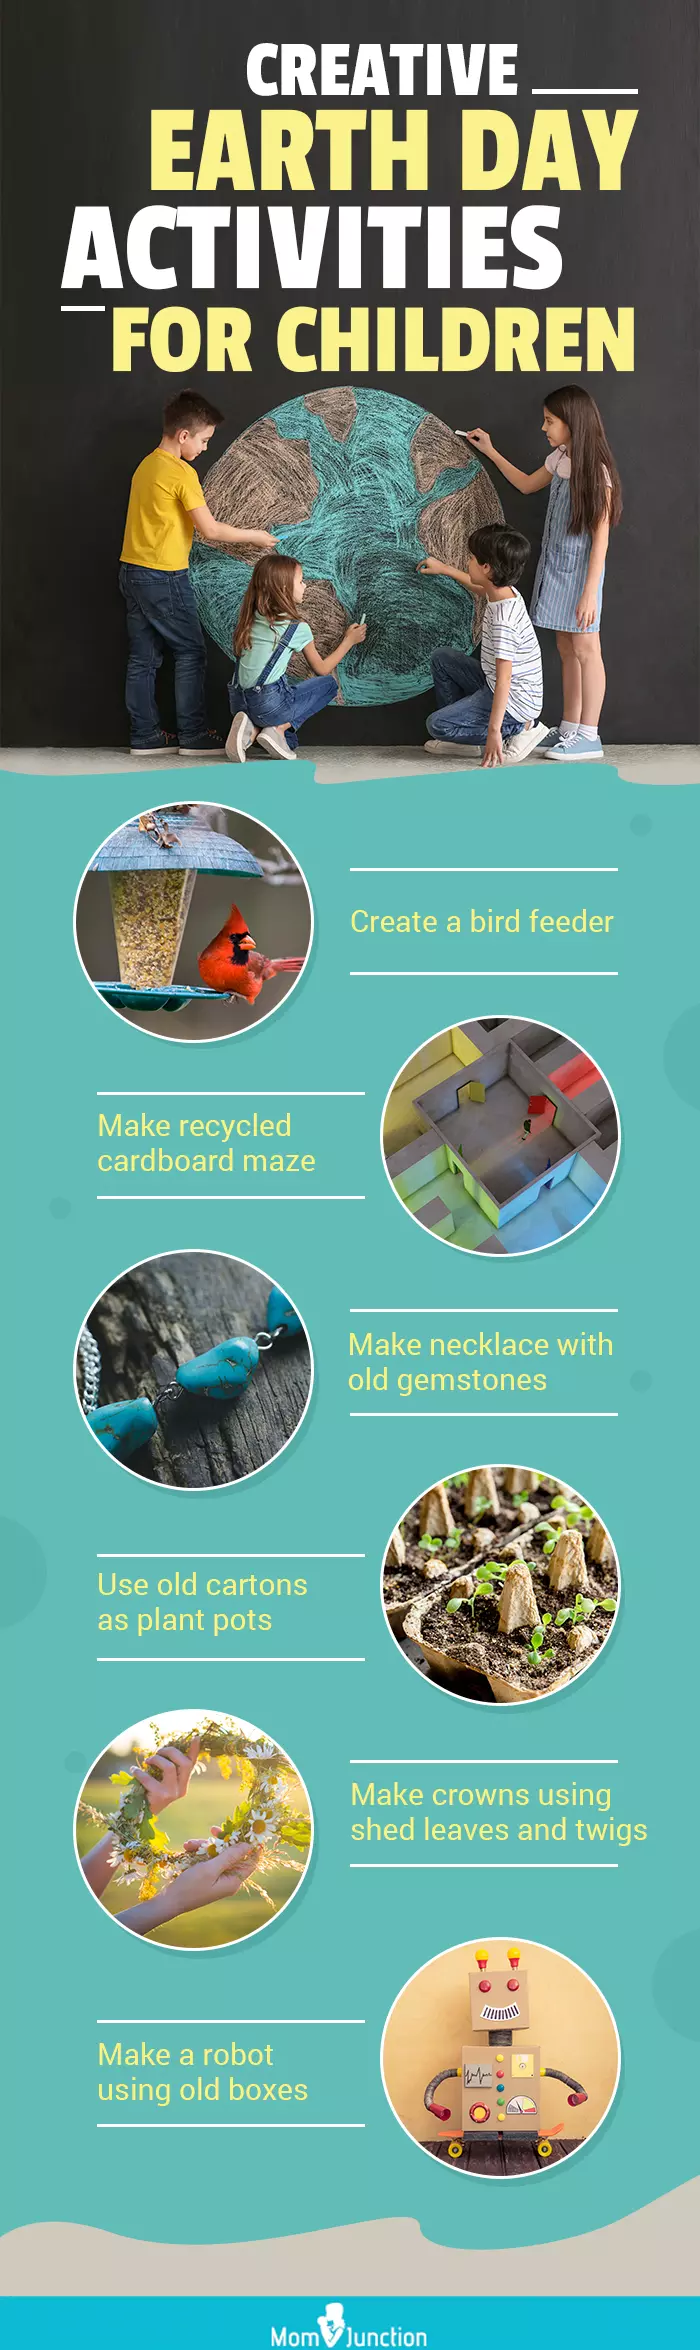 creative earth day activities for children (infographic)